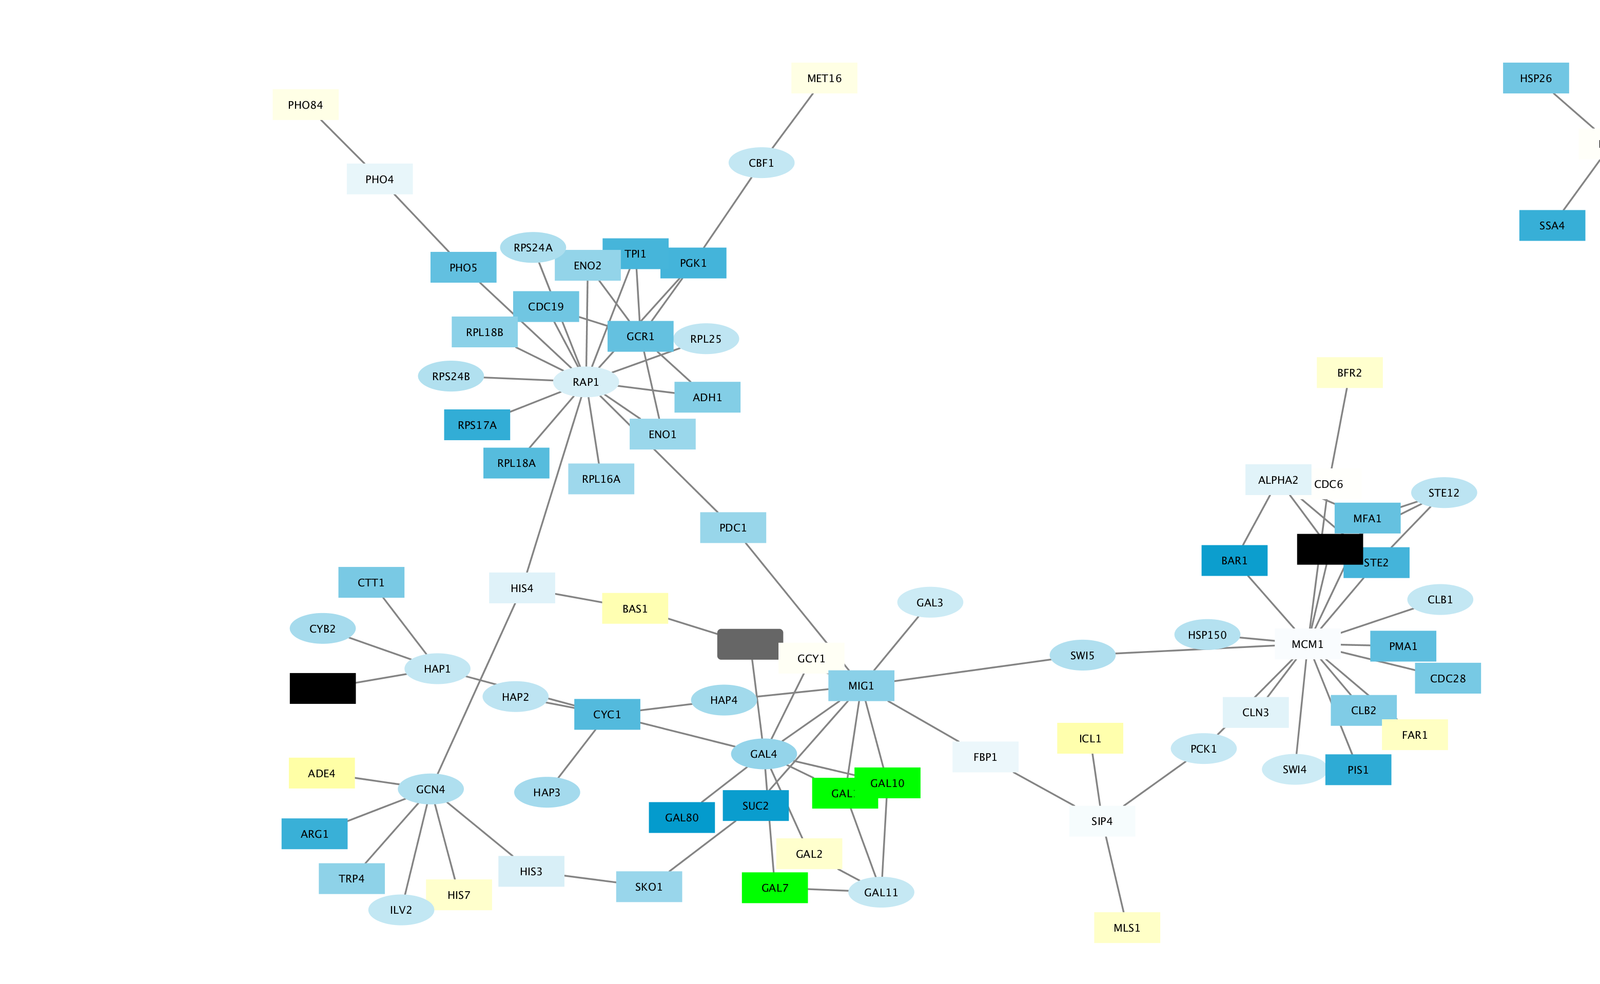 1600px-Final_network3.png